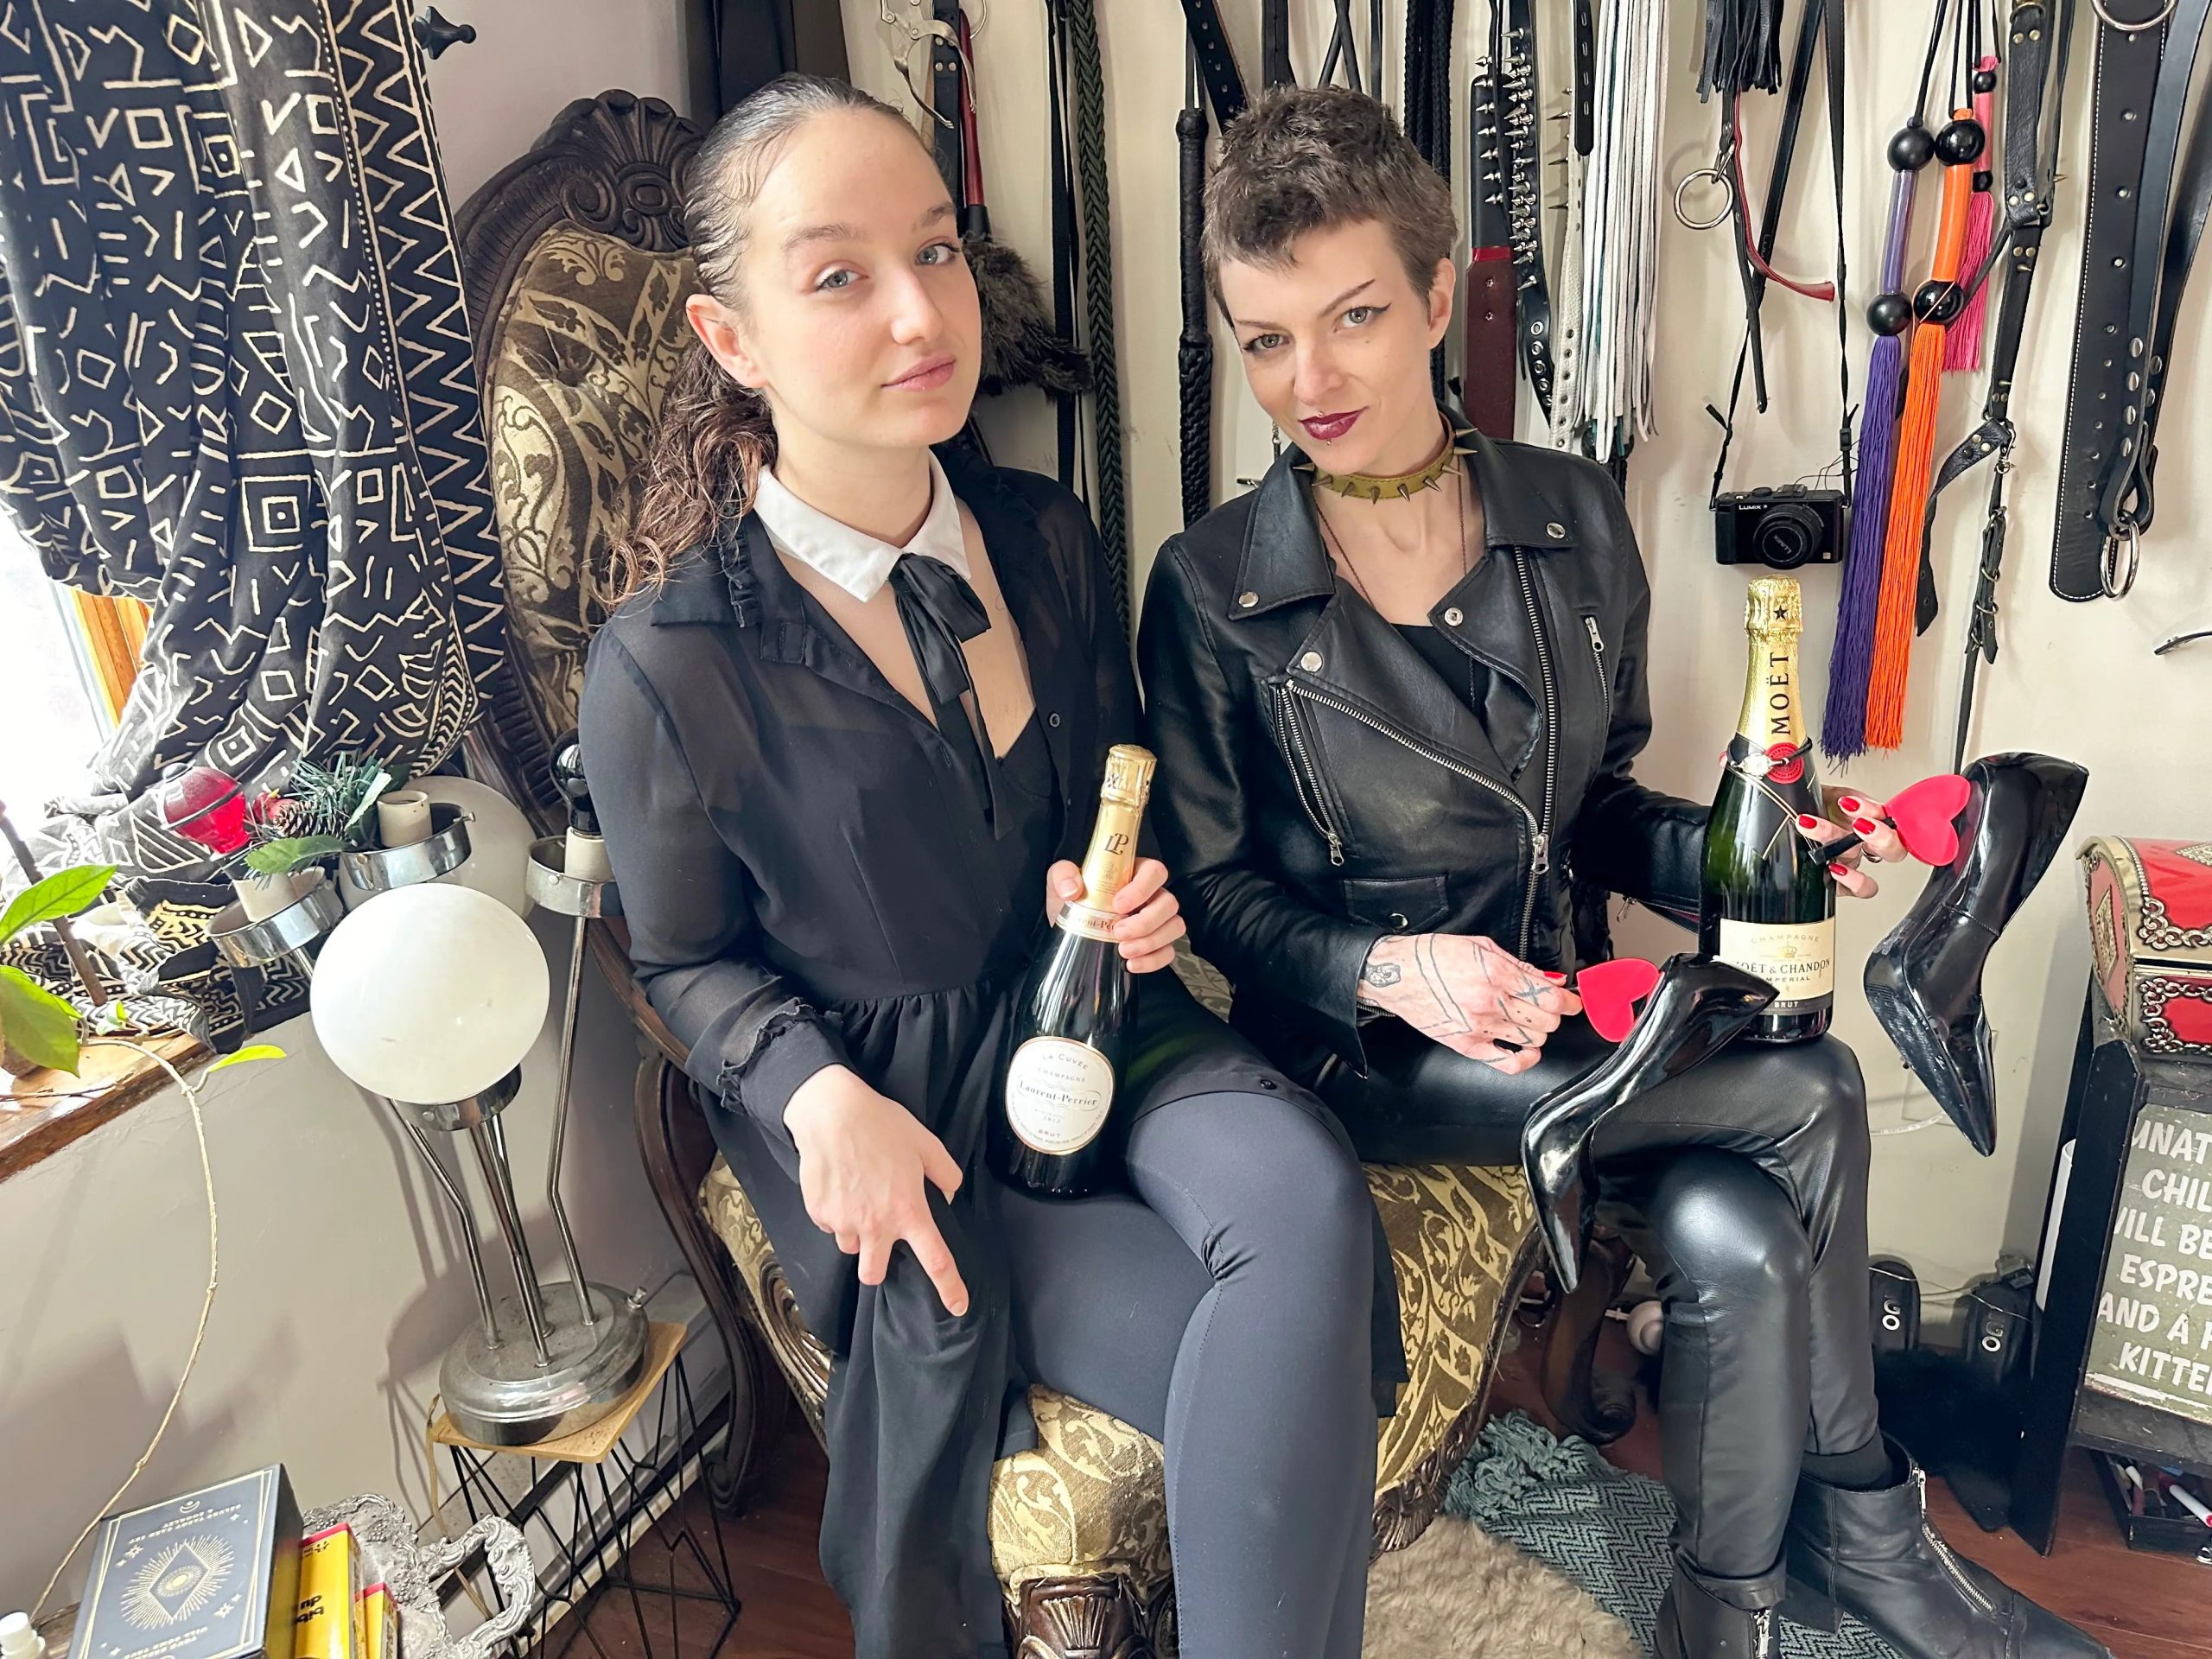 The Valentine’s Day Dominatrixes of Montreal: A Look into Professional Domination and the Gifts They Receive